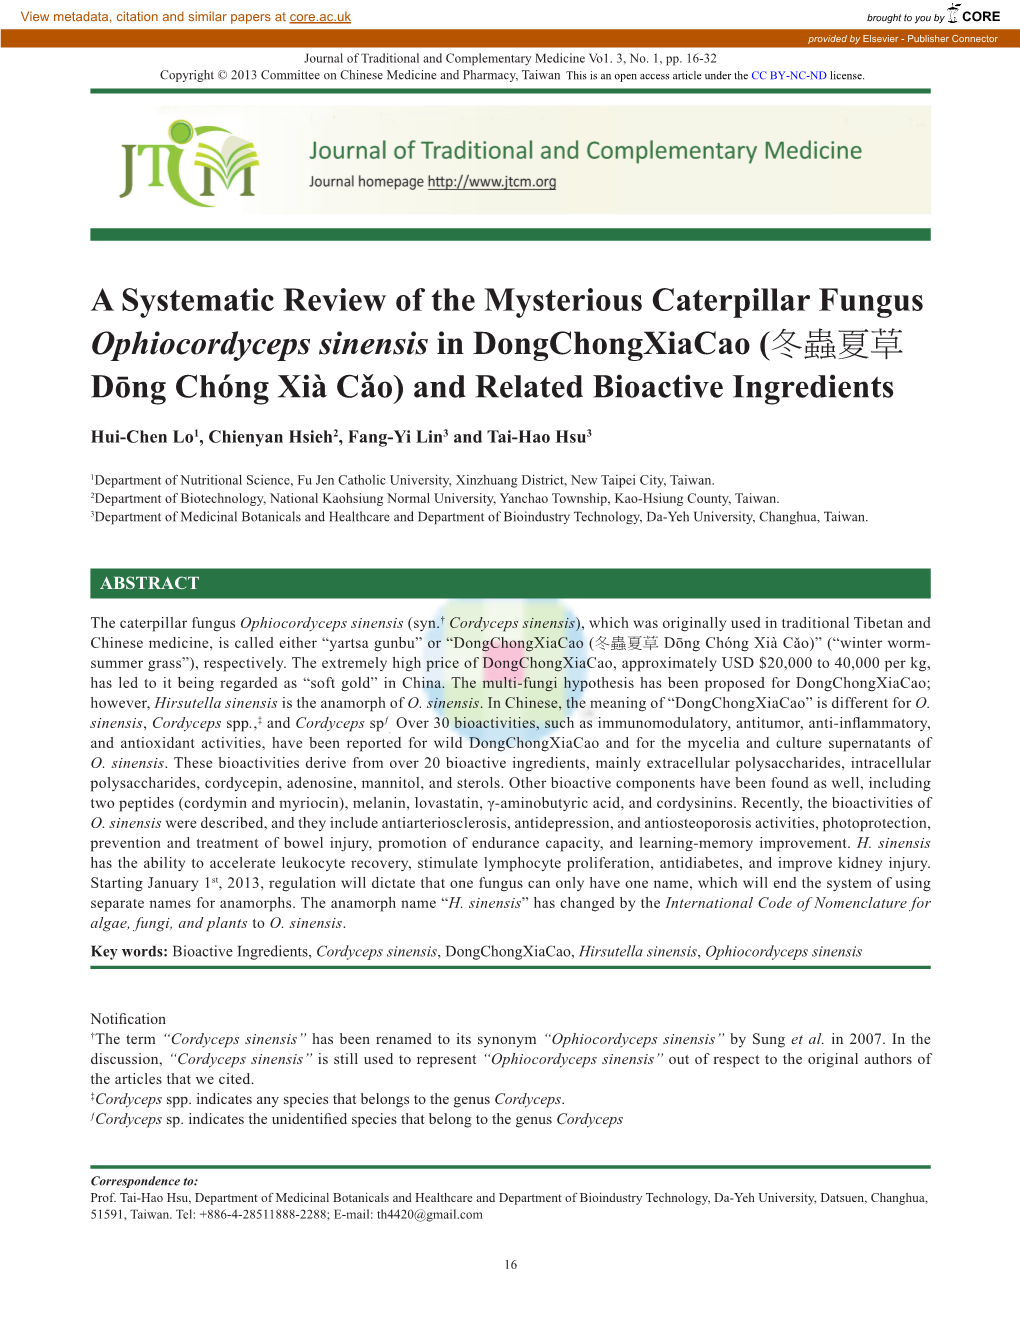 A Systematic Review of the Mysterious Caterpillar Fungus Ophiocordyceps Sinensis in Dongchongxiacao (冬蟲夏草 Dōng Chóng Xià Cǎo) and Related Bioactive Ingredients